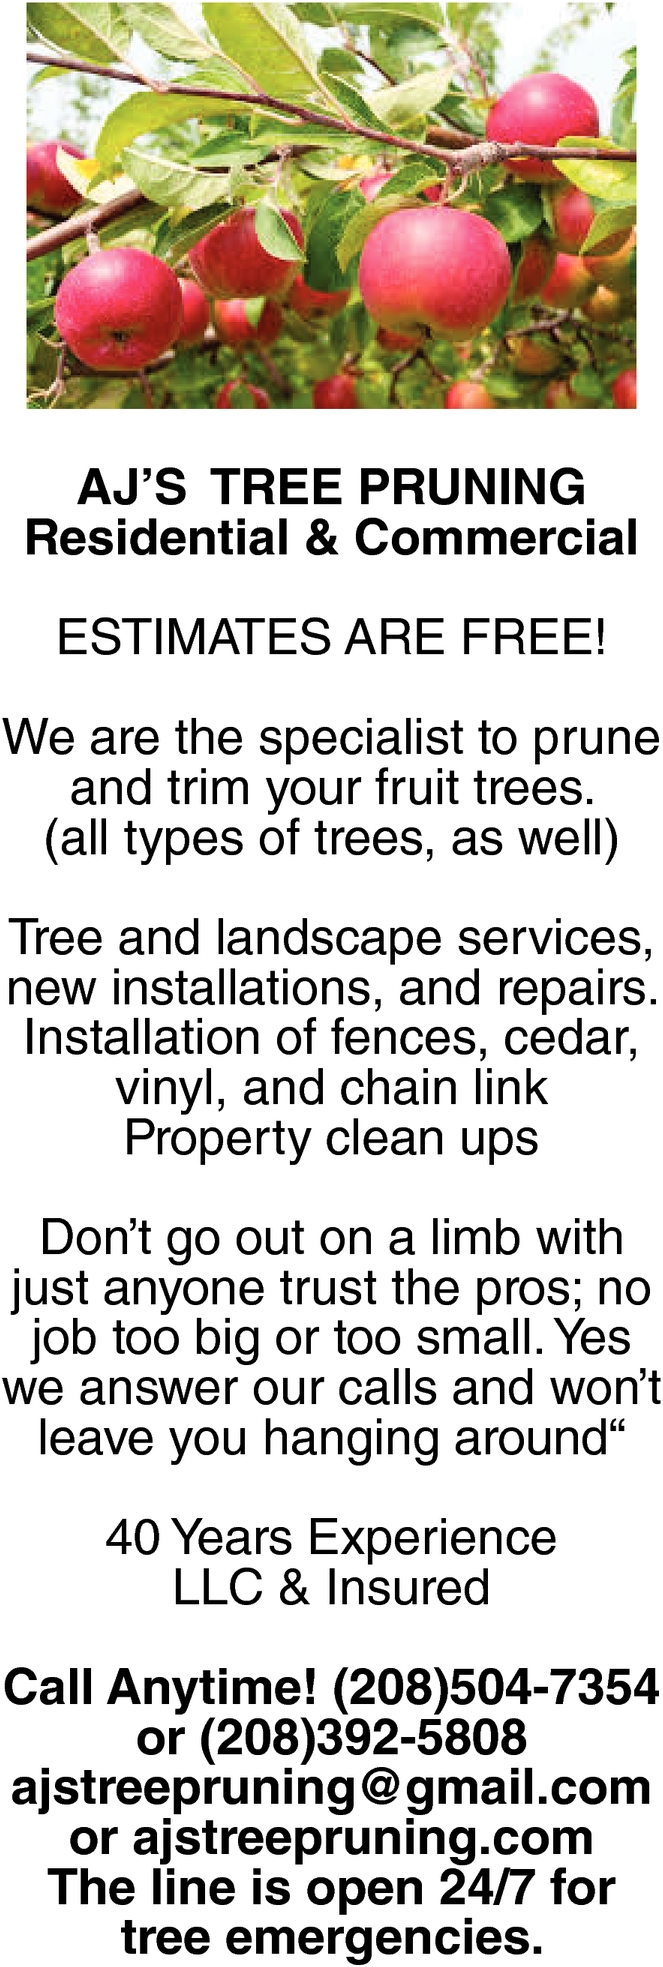 Residential & Commercial Tree Pruning